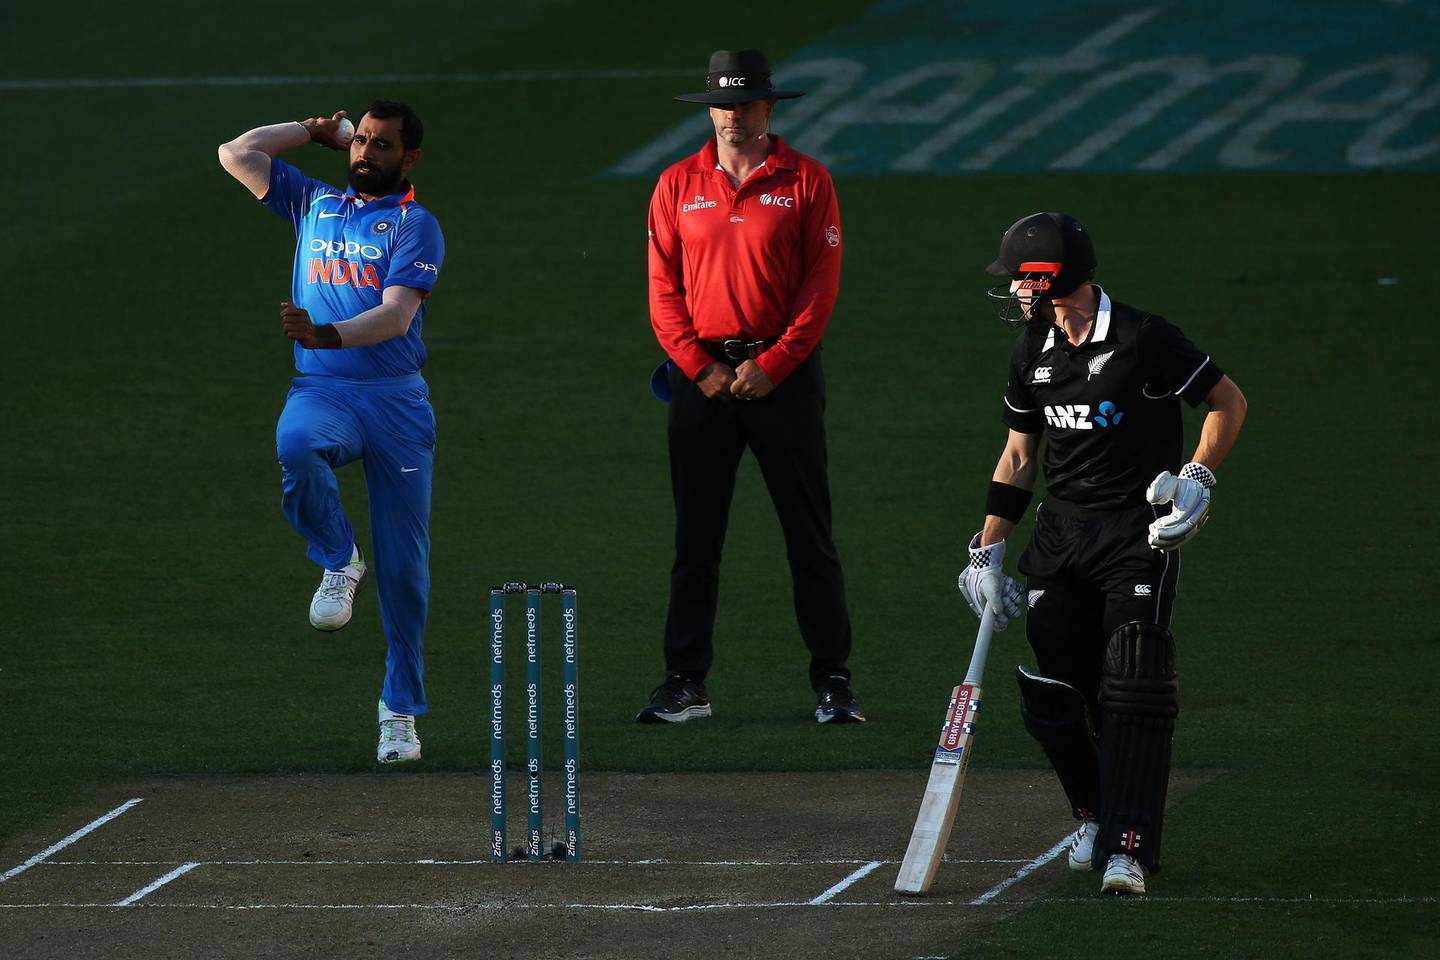 WELLINGTON, NEW ZEALAND - FEBRUARY 03: Mohammed Shami of India bowls during game five in the One Day International series between New Zealand and India at Westpac Stadium on February 03, 2019 in Wellington, New Zealand. (Photo by Hagen Hopkins/Getty Images)